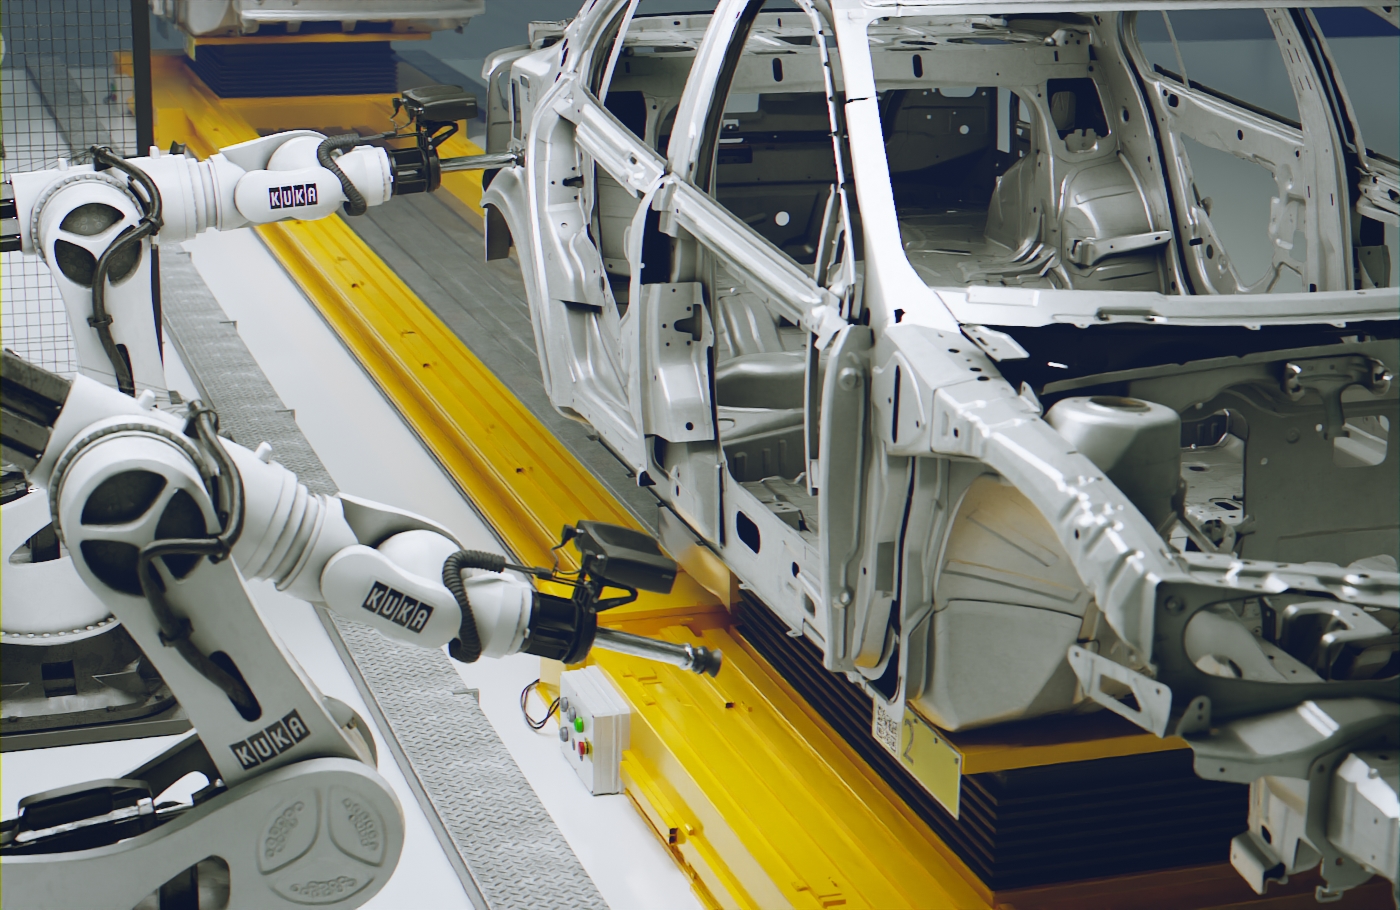 Pickit3D & Zivid: 3D Vision Solutions for the Automotive Industry